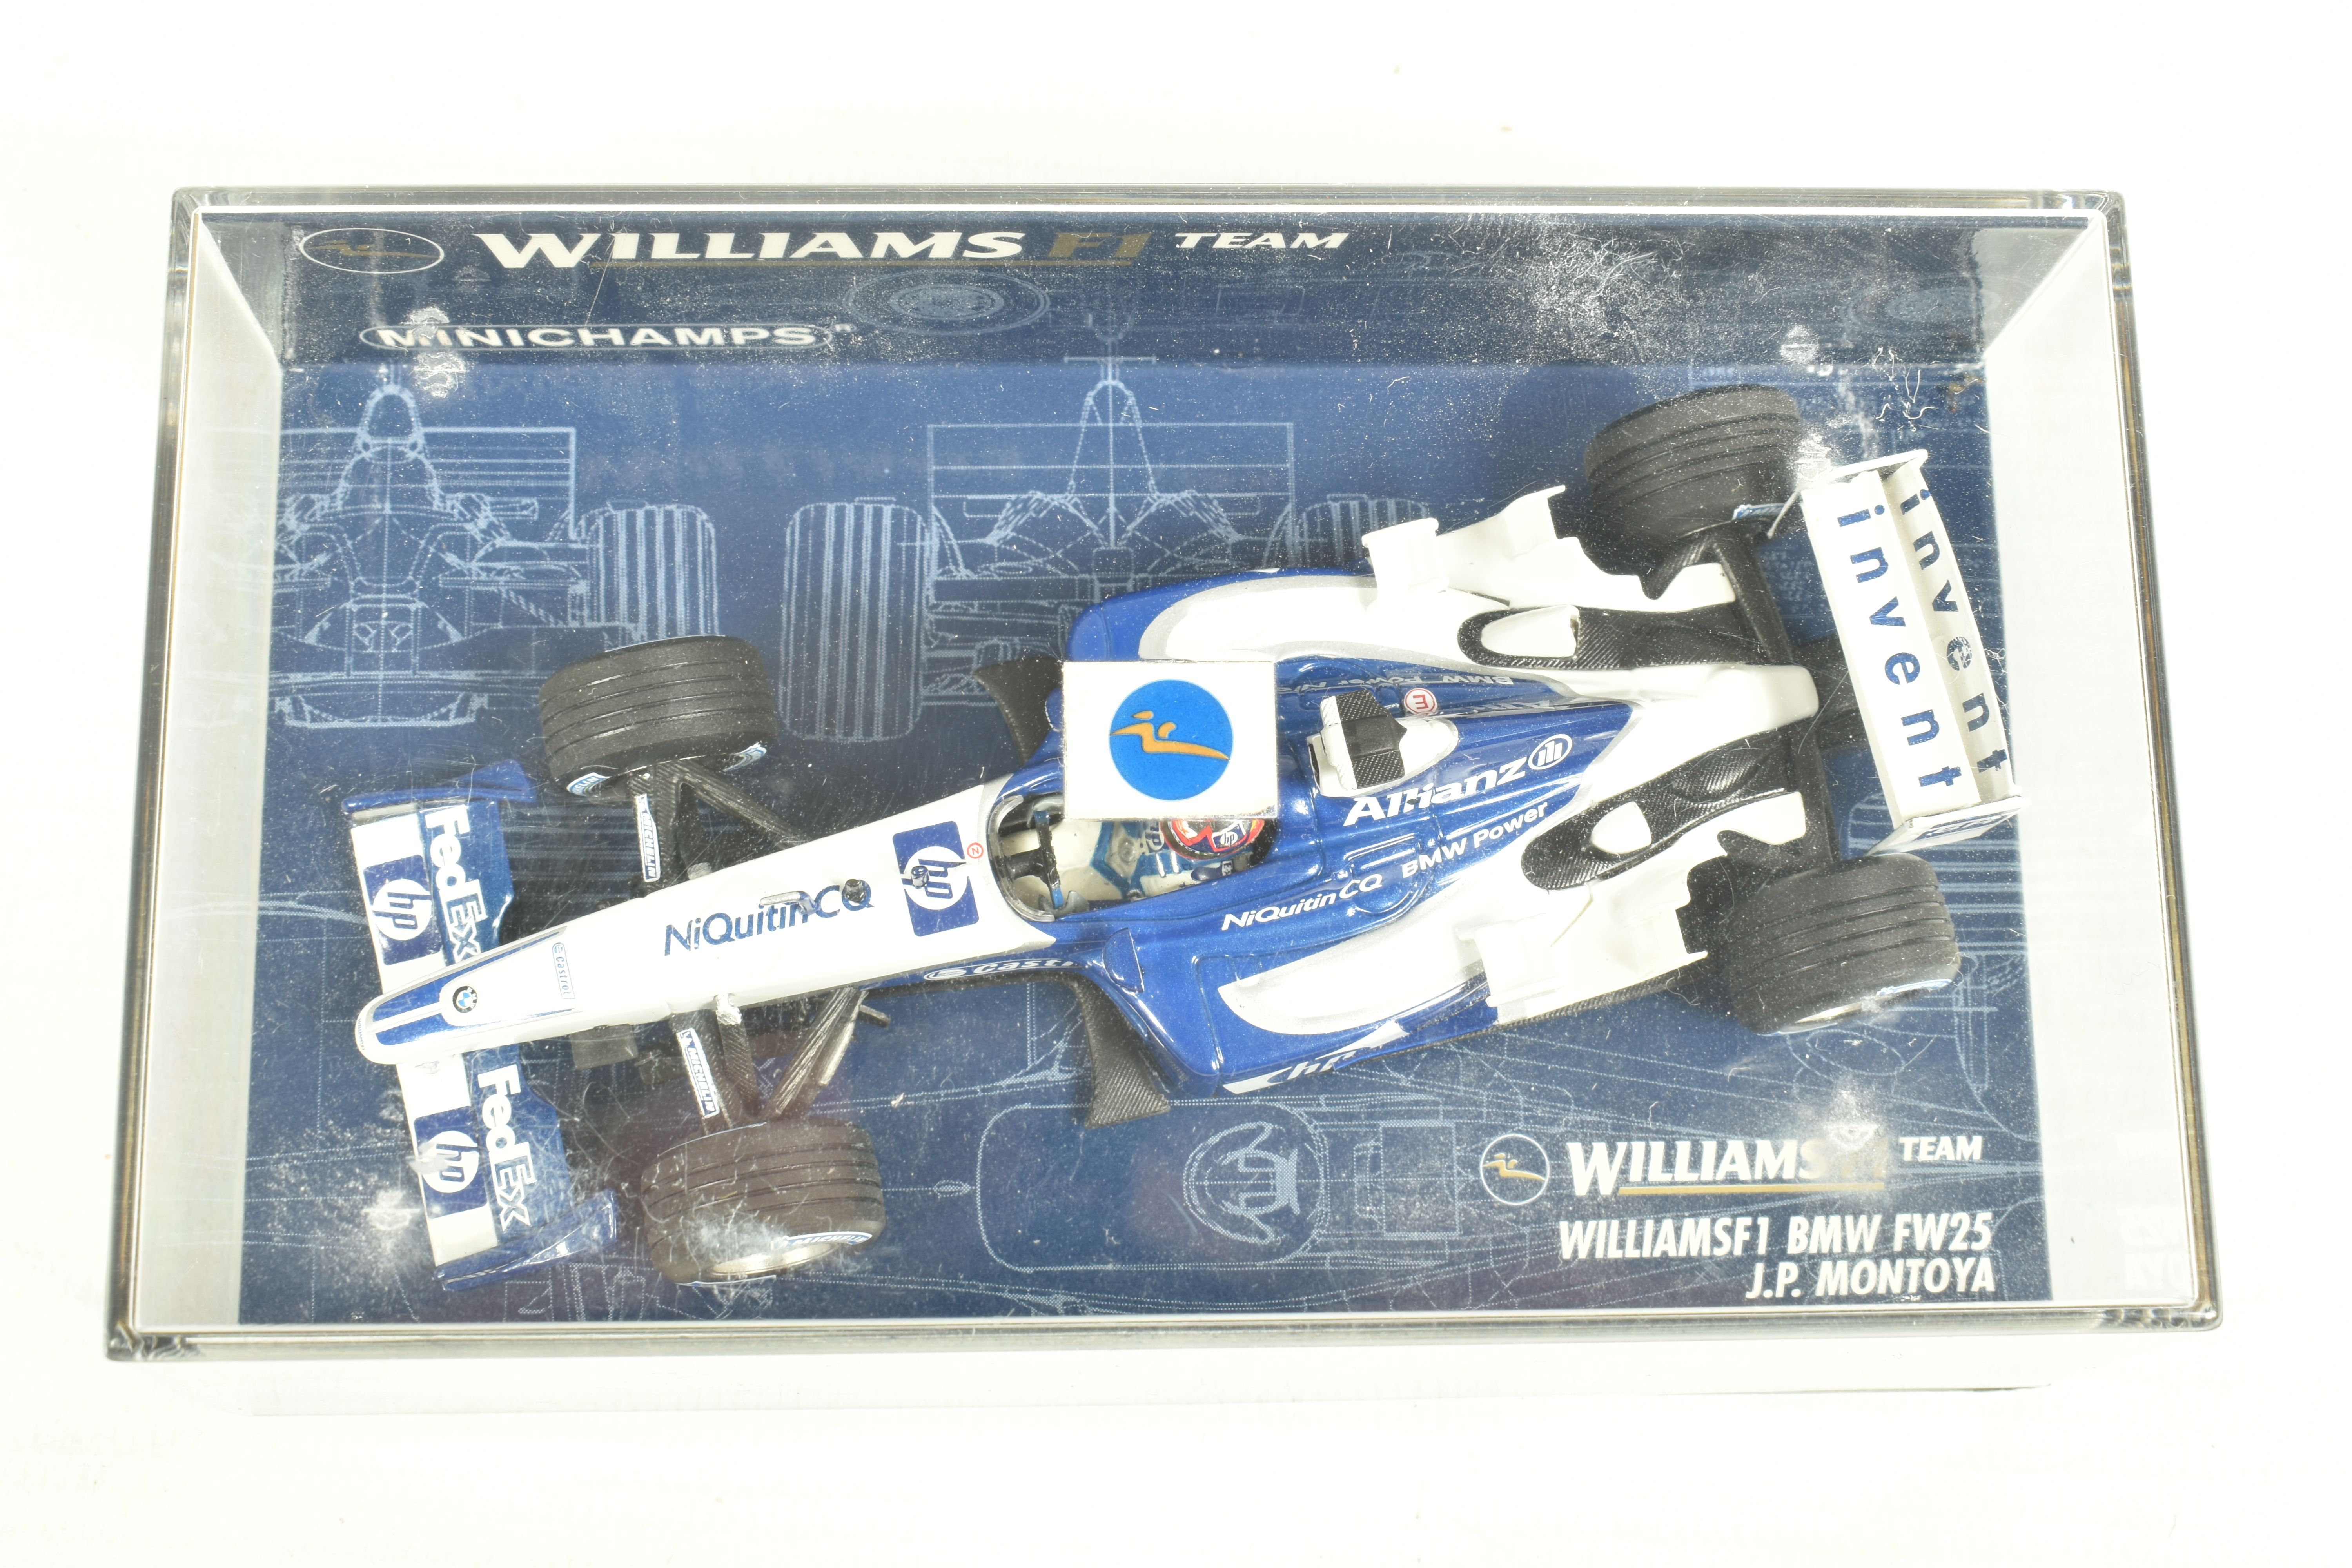 SEVEN MINICHAMP 1.43 SCALE DIECAST MODELS, to include a Williams F1 BMW RW26 JP Montoya, model no. - Image 8 of 16